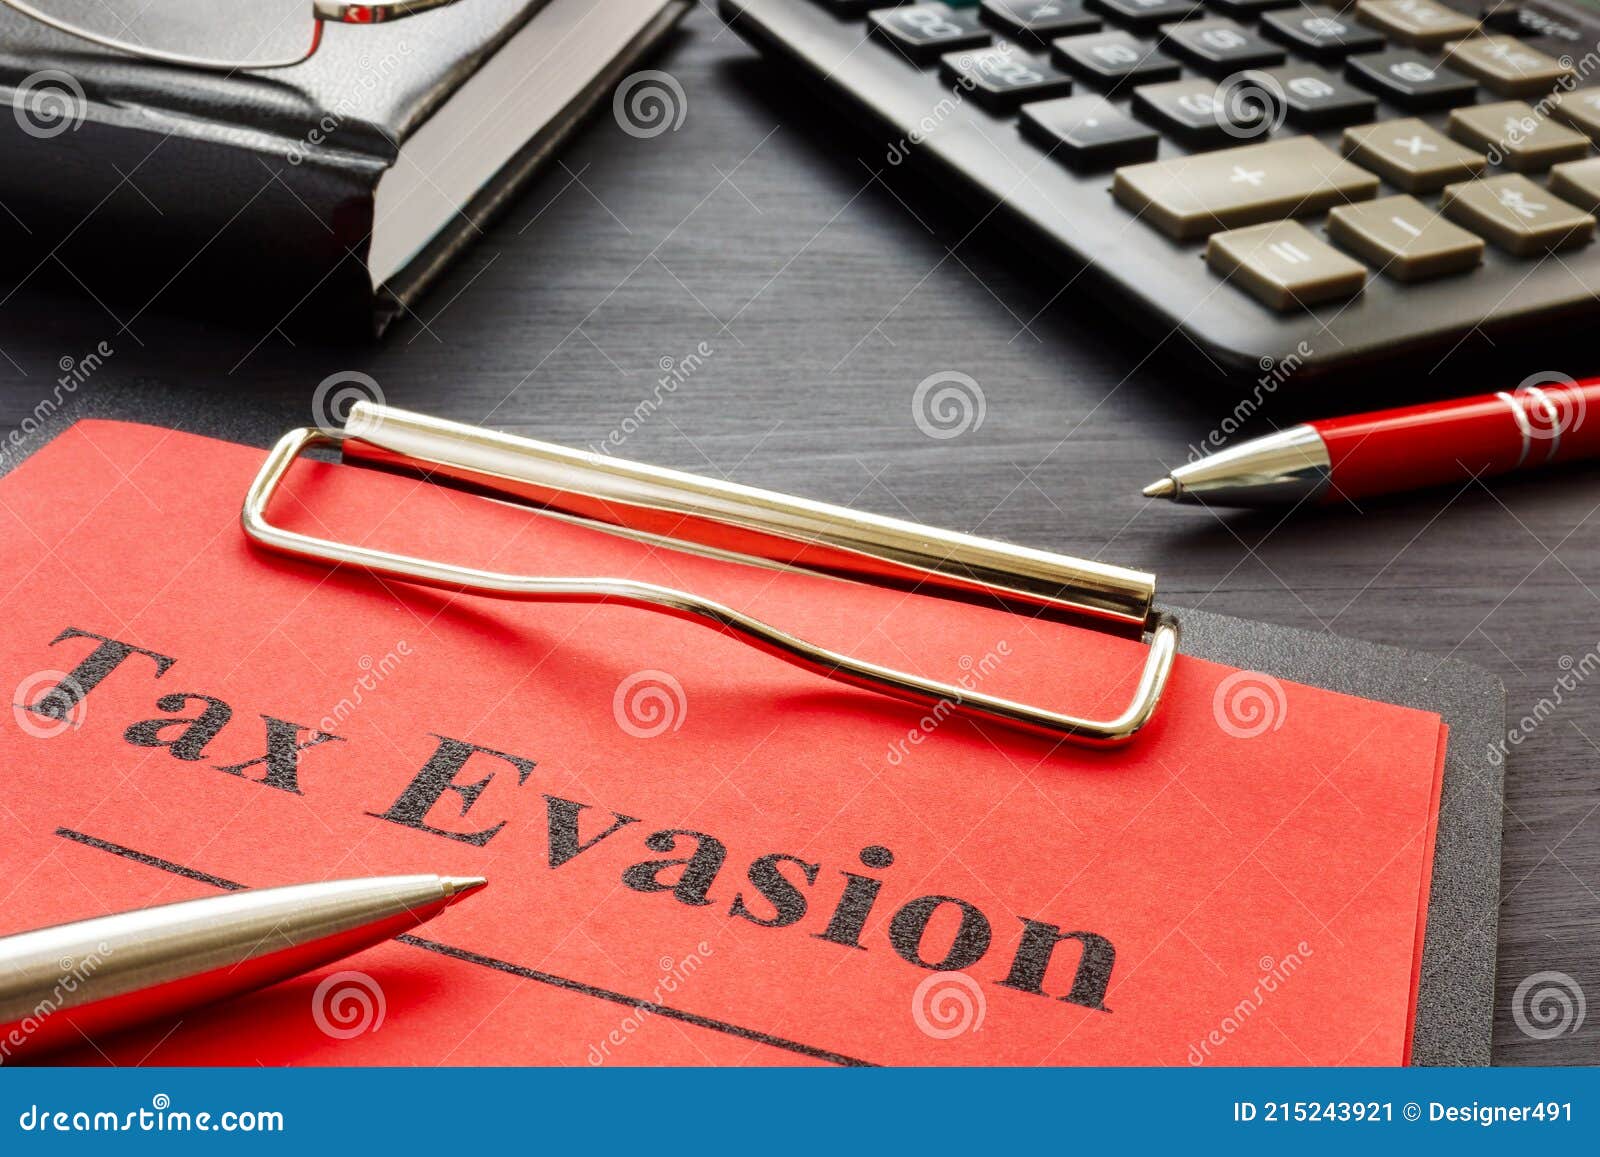 tax evasion result of audit with clipboard.